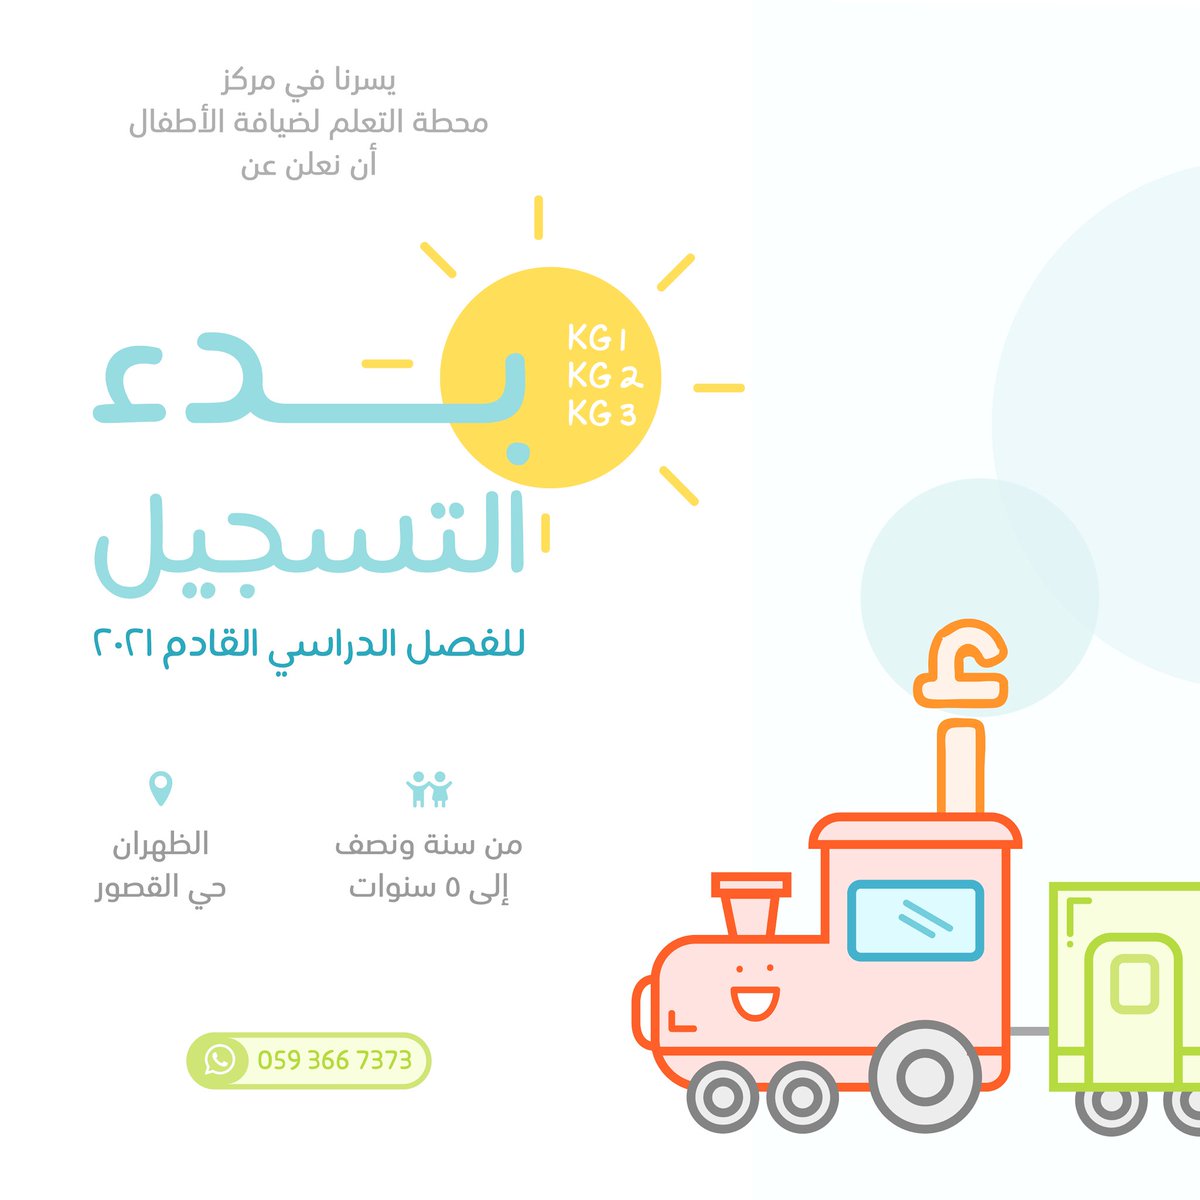 Ø­Ø¶Ø§Ù†Ø© Ù…Ø­Ø·Ø© Ø§Ù„ØªØ¹Ù„Ù… Learning Station Daycare Learnstationdc Twitter